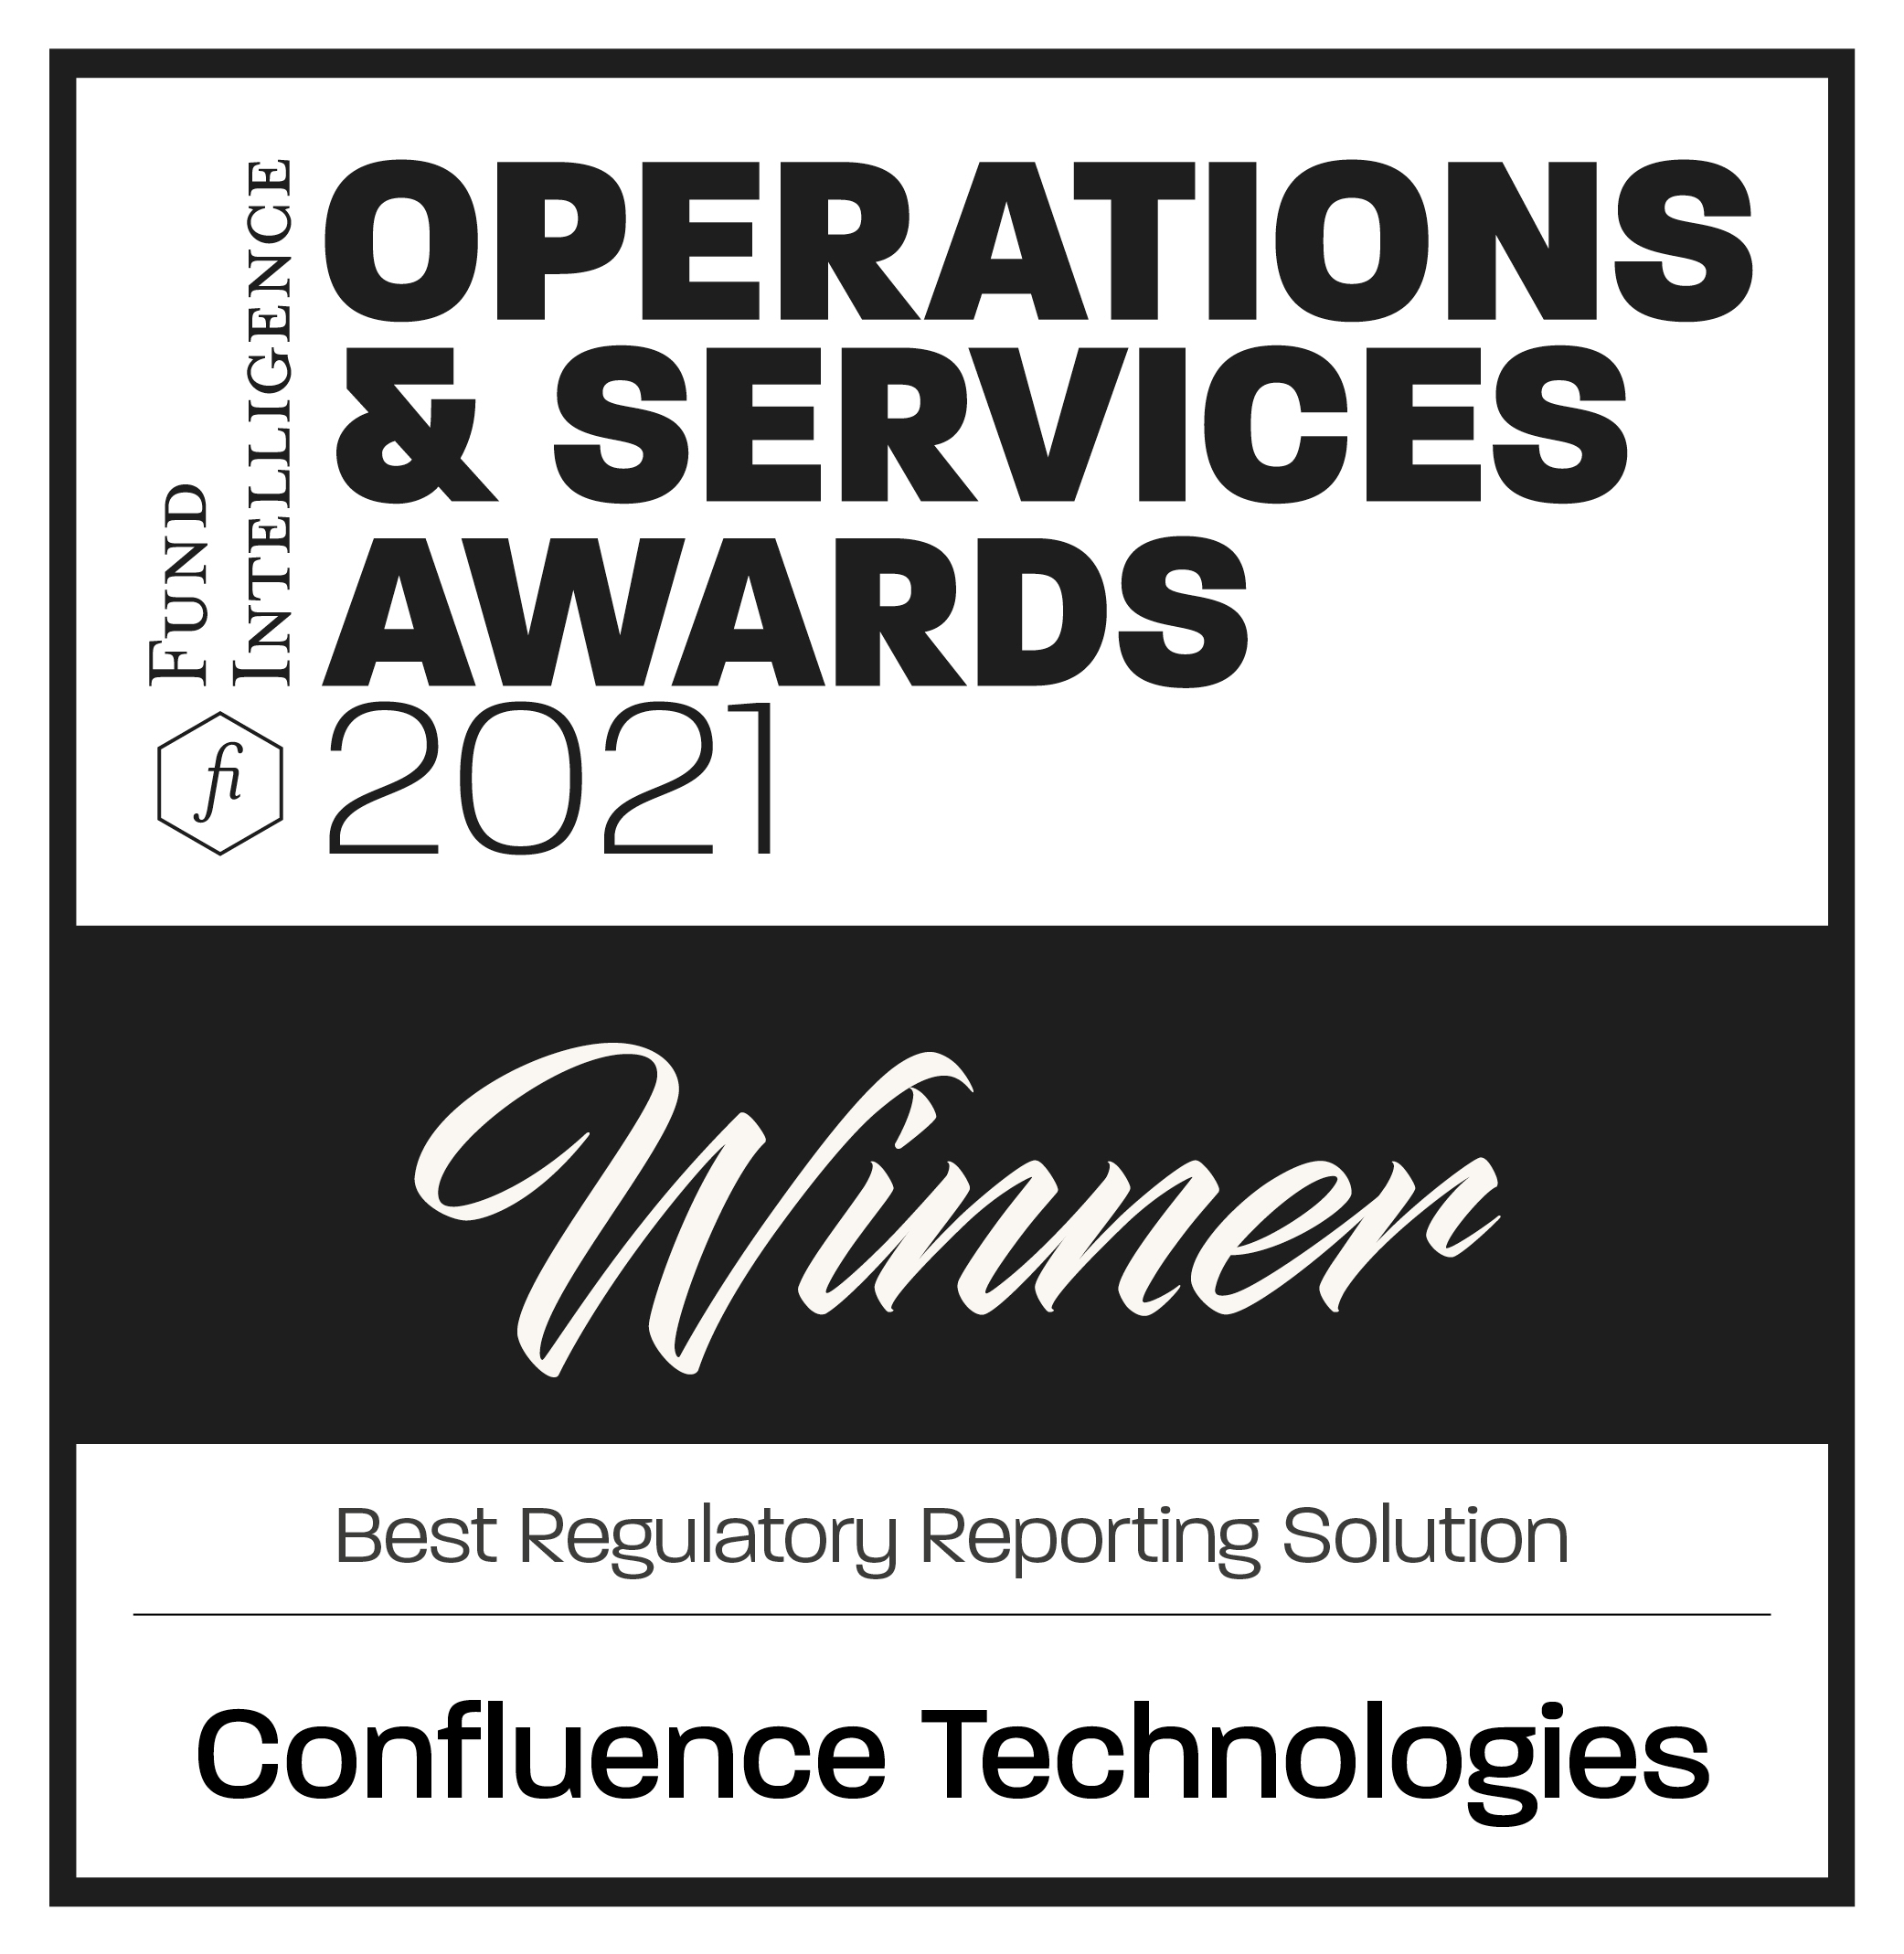 FI Operations Services Awards 2021 Best Regulatory Reporting System Winner - Confluence (Logo)